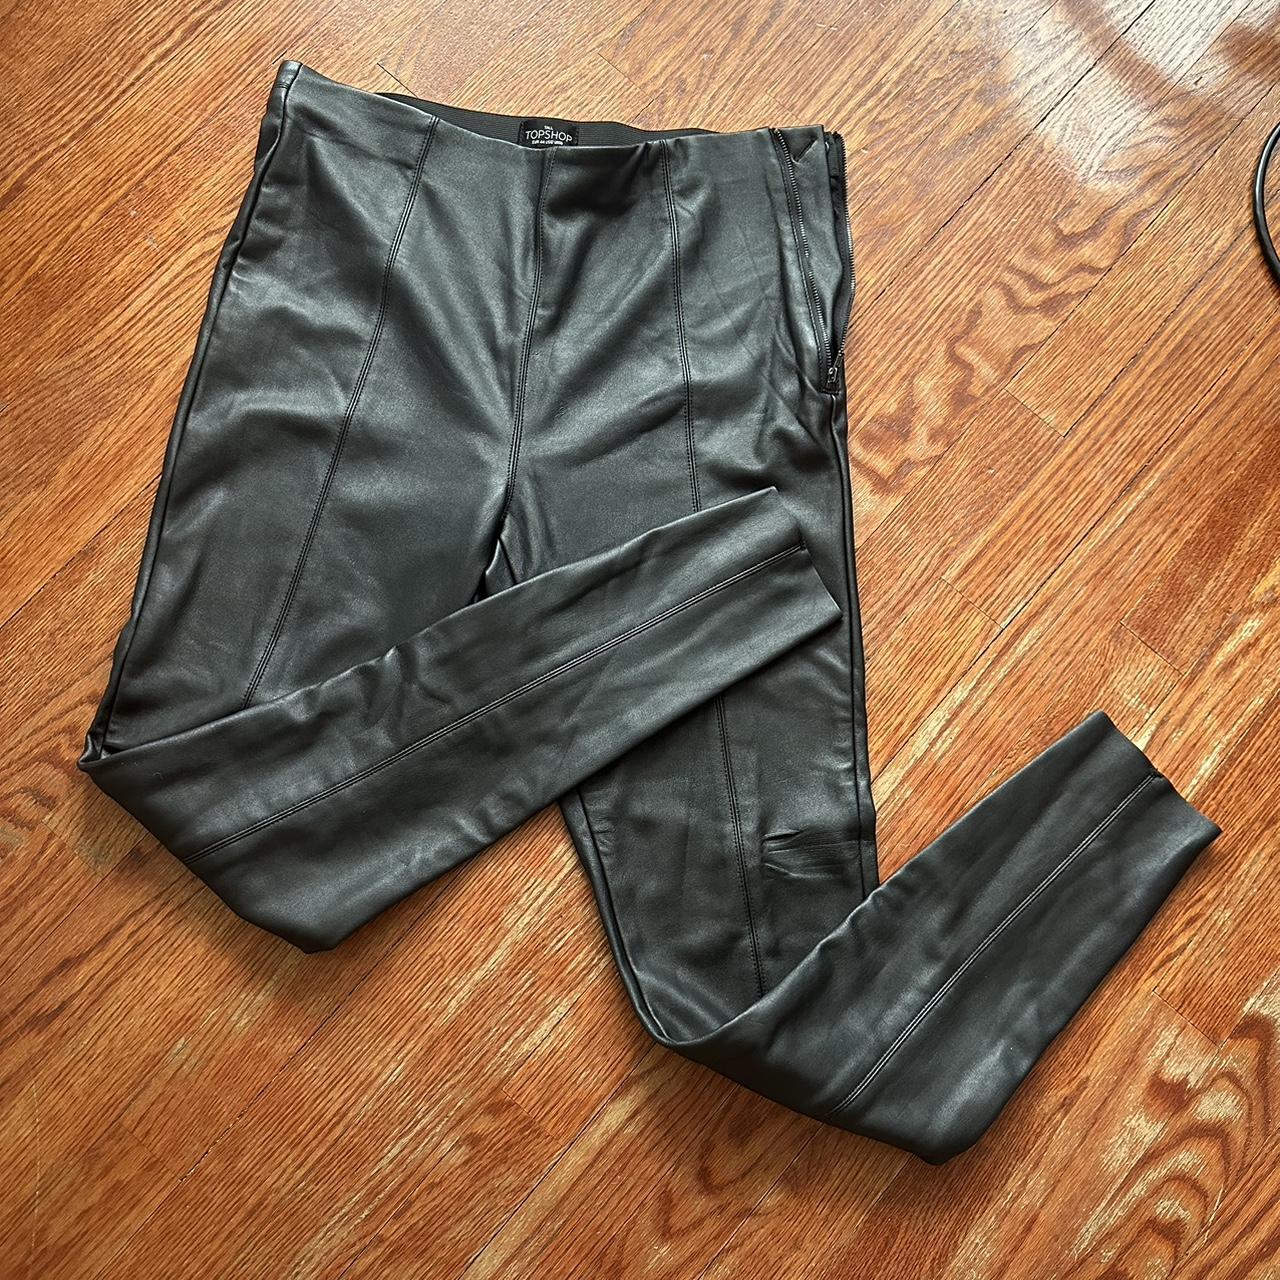 Topshop tall leather pants - Depop